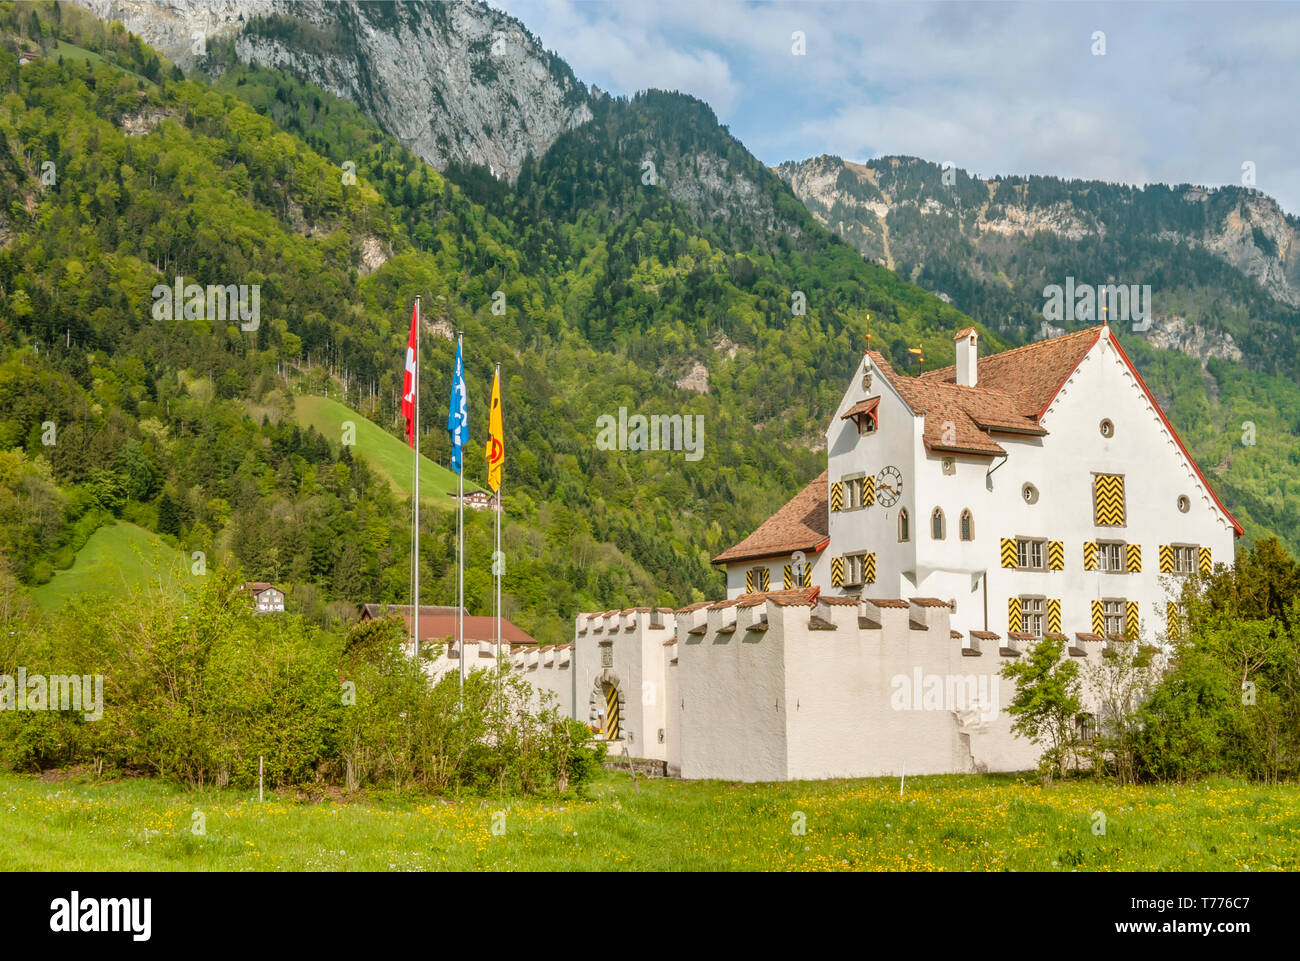 Castle A Pro in Seedorf at Lake Lucerne, Switzerland Stock Photo